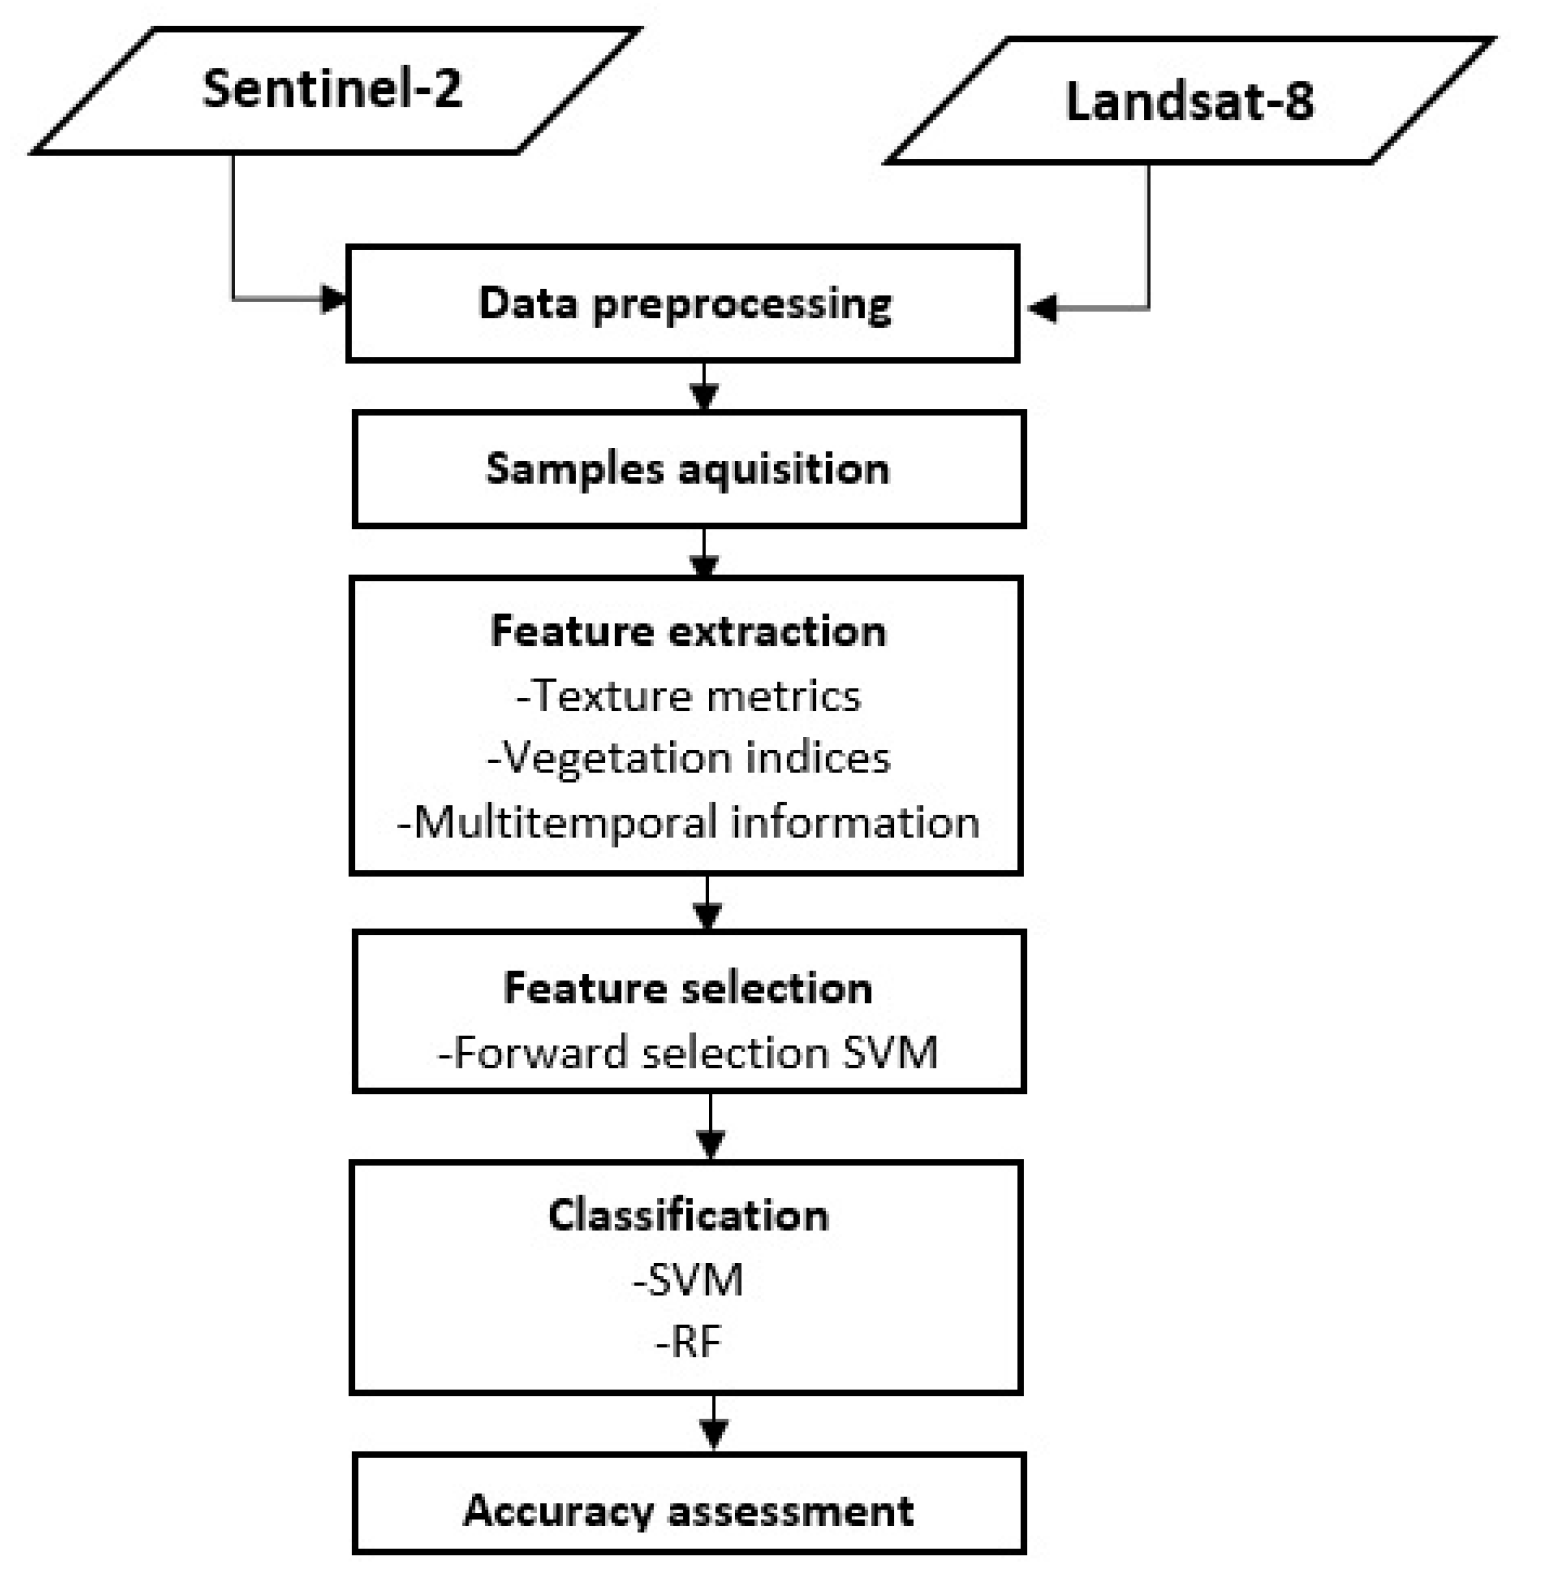 Remote Sensing | Free Full-Text | Evaluating Sentinel-2 and Landsat-8 Data  to Map Sucessional Forest Stages in a Subtropical Forest in Southern Brazil  | HTML